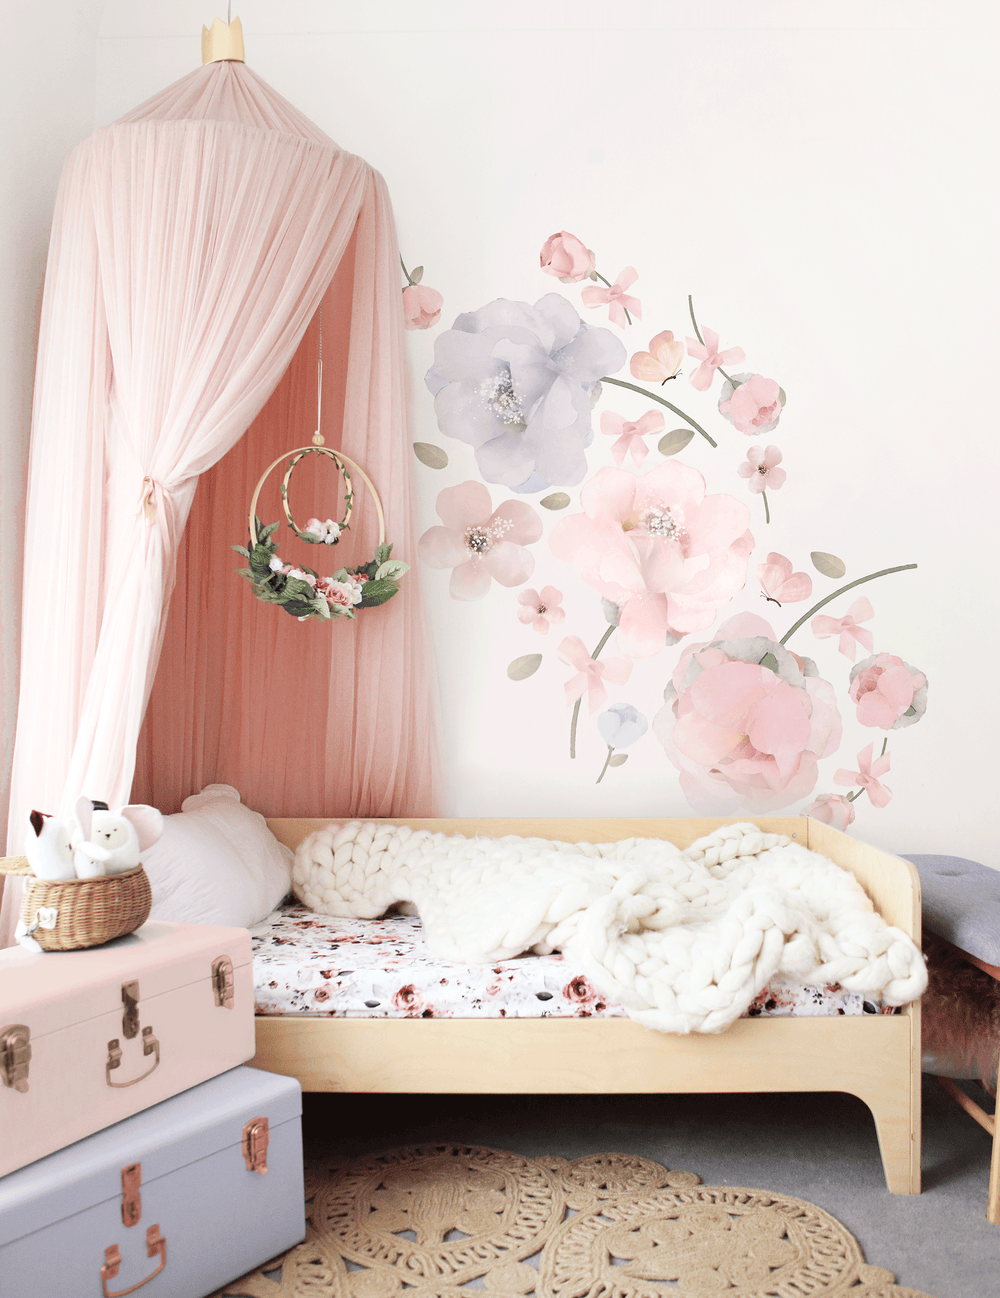 Bows and Roses Wall Sticker - Tutu Irresistible Boutique